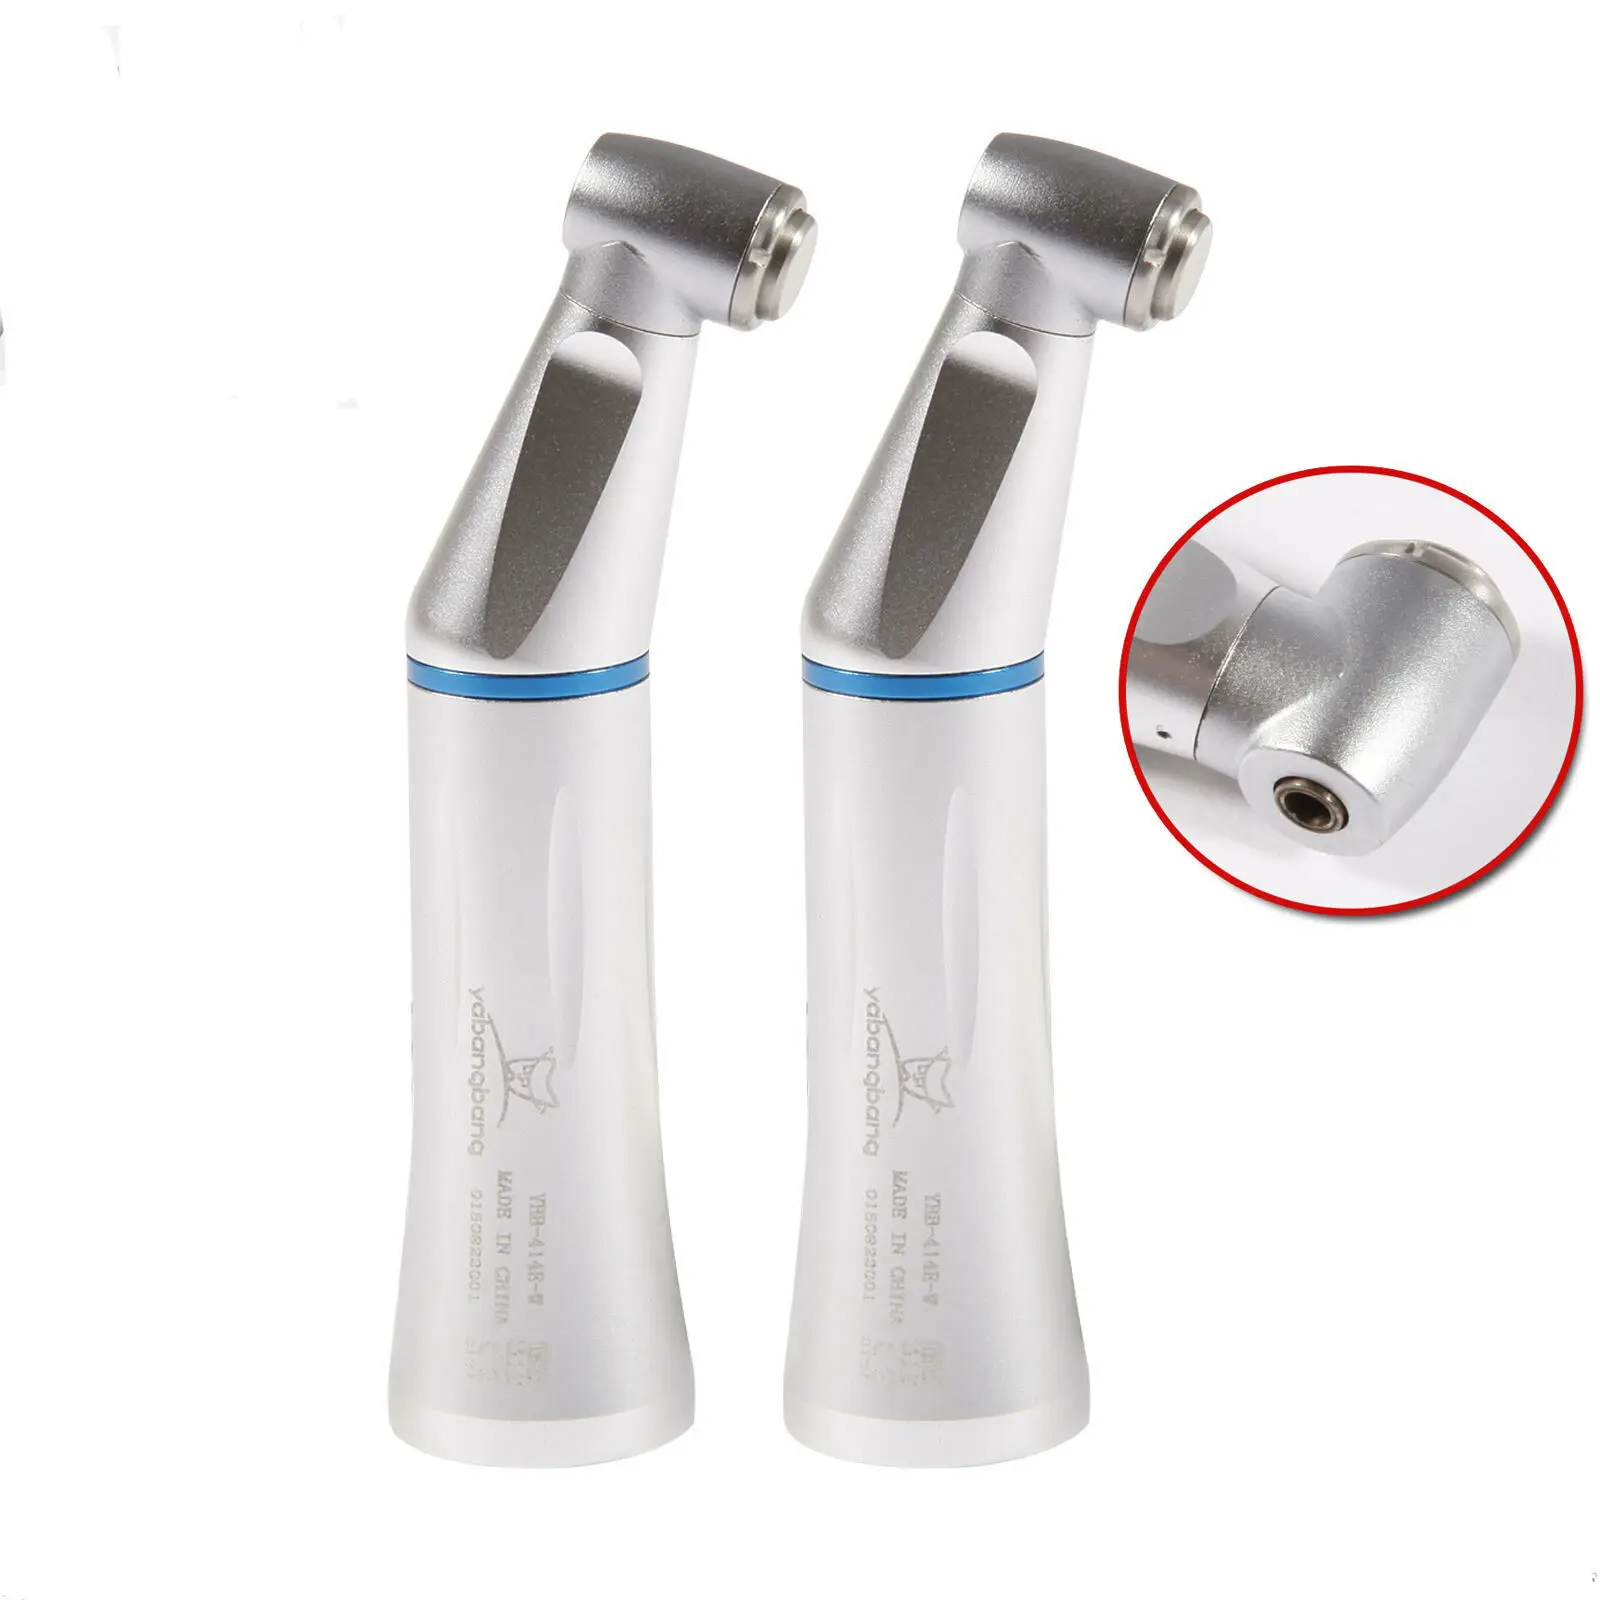 

2PCS Dental Slow Low Speed Contra Angle Handpiece 1:1 Ratio Push Button Inner Water Spary Turbine Nsk Style